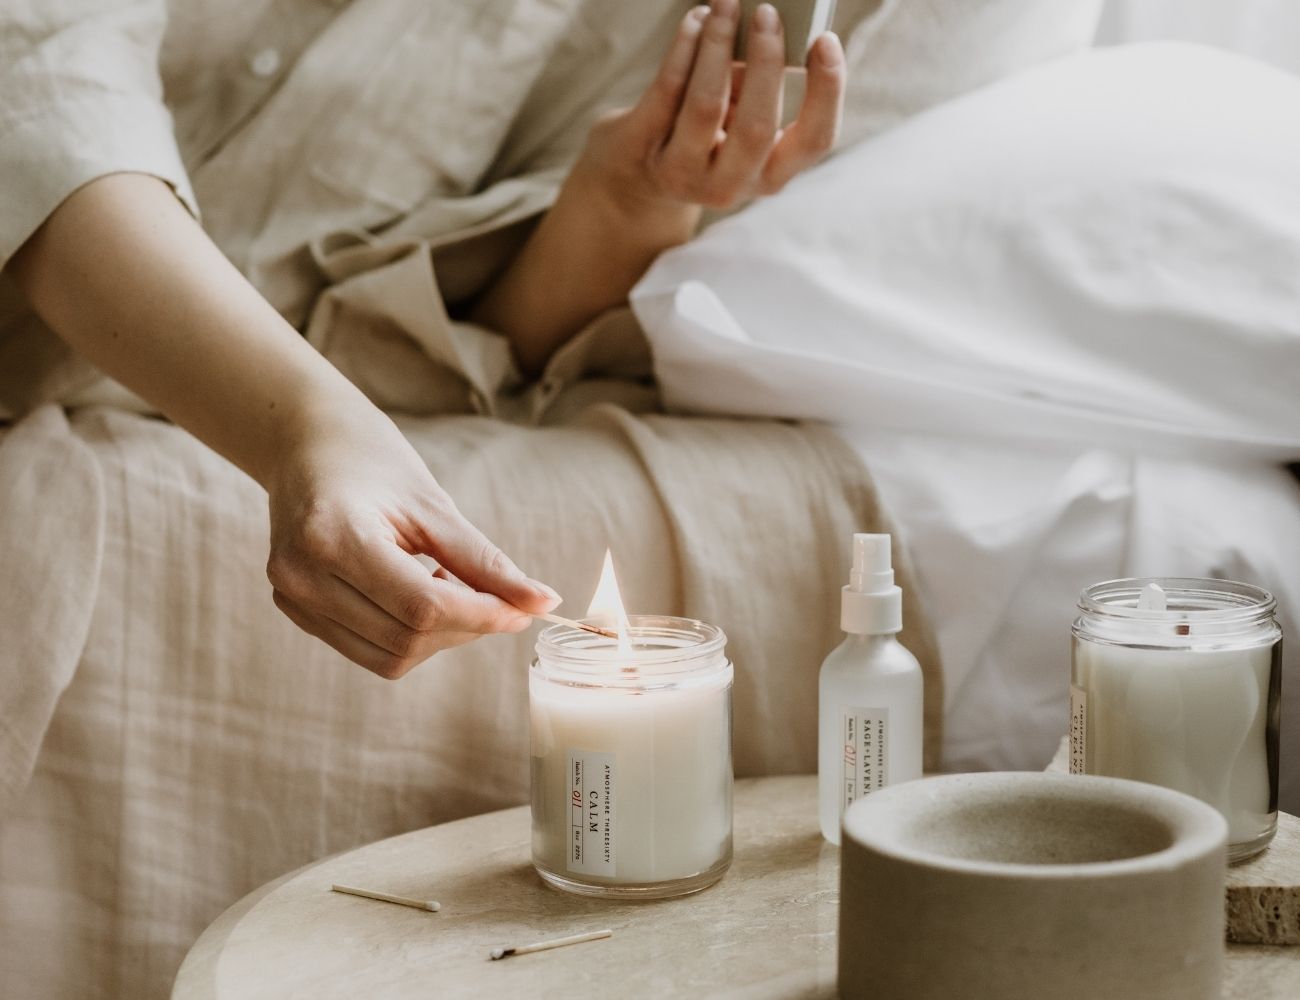 Woman is lighting an Atmosphere Threesixty Aromatherapy Candle on her nightstand, with an Aura Mist sitting next to it.